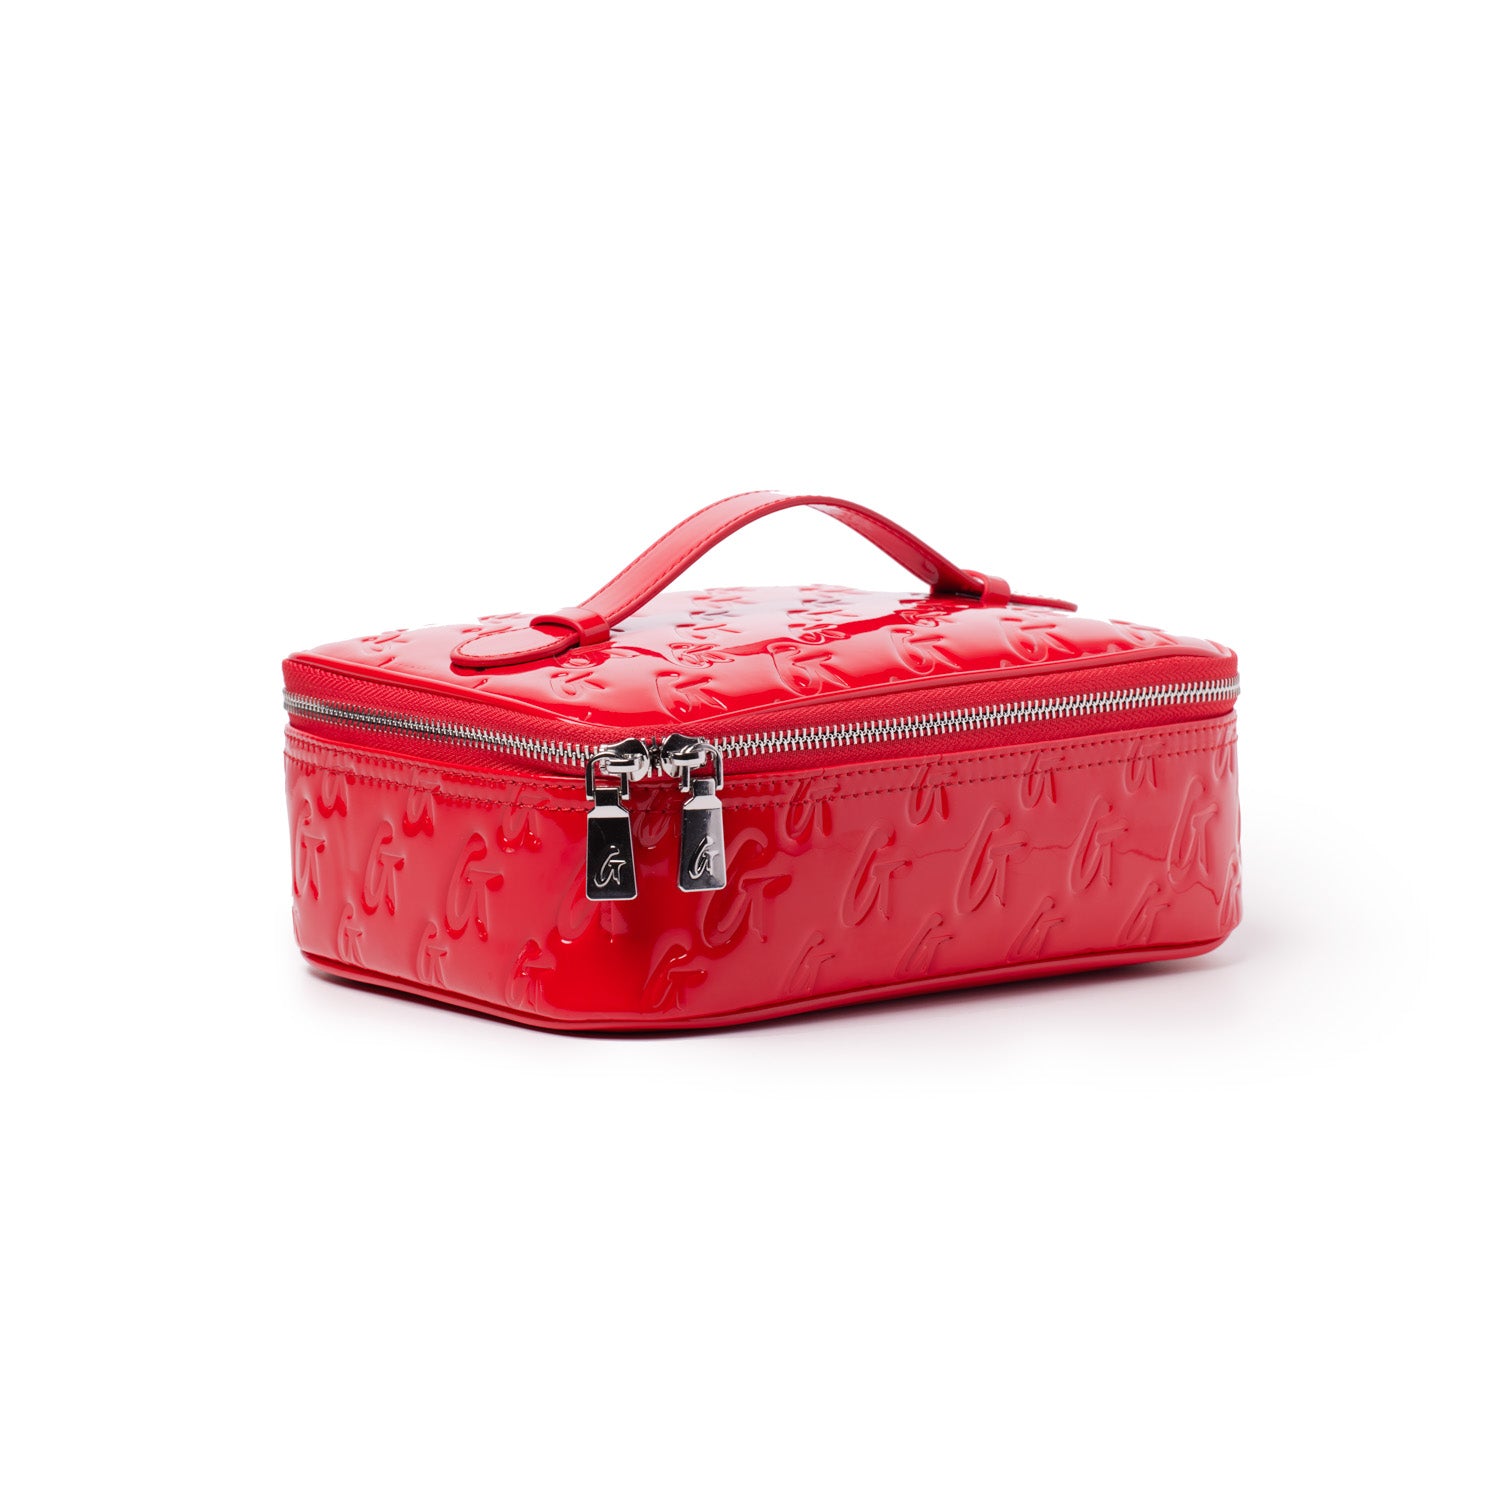 MONOGRAM COSMETIC POUCH MIRROR RED – Glam-Aholic Lifestyle